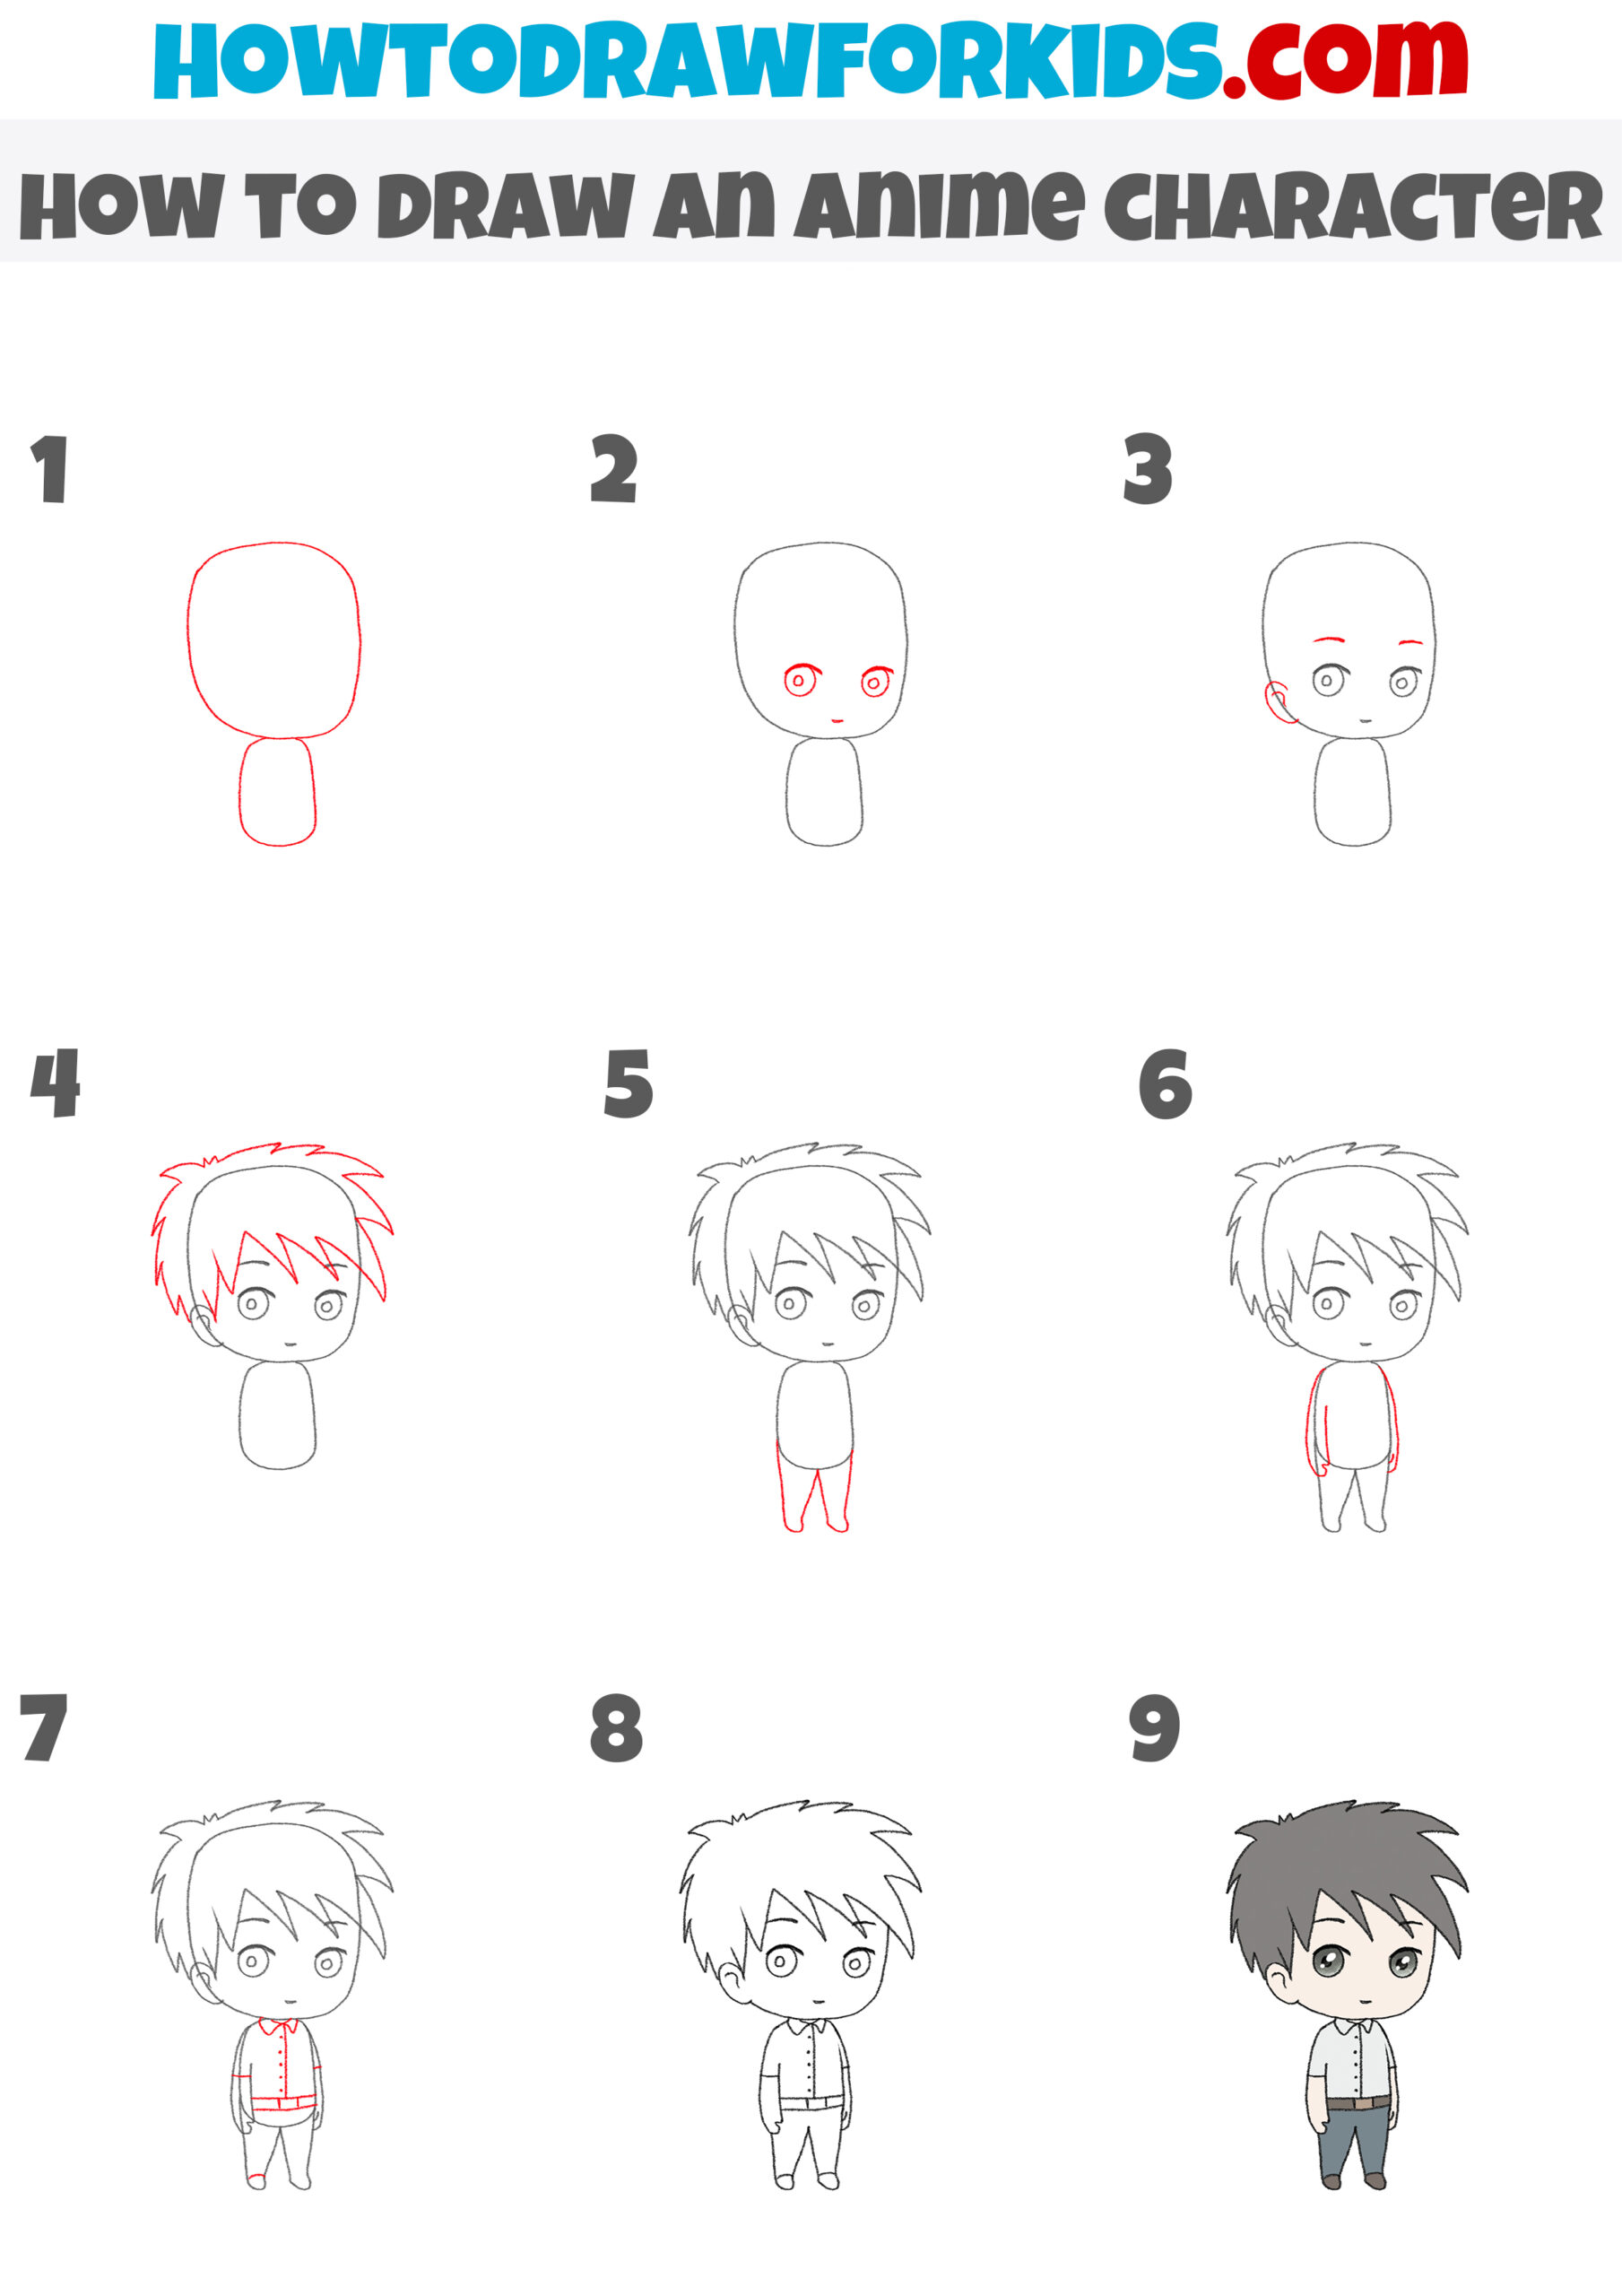 how to draw an anime character step by step